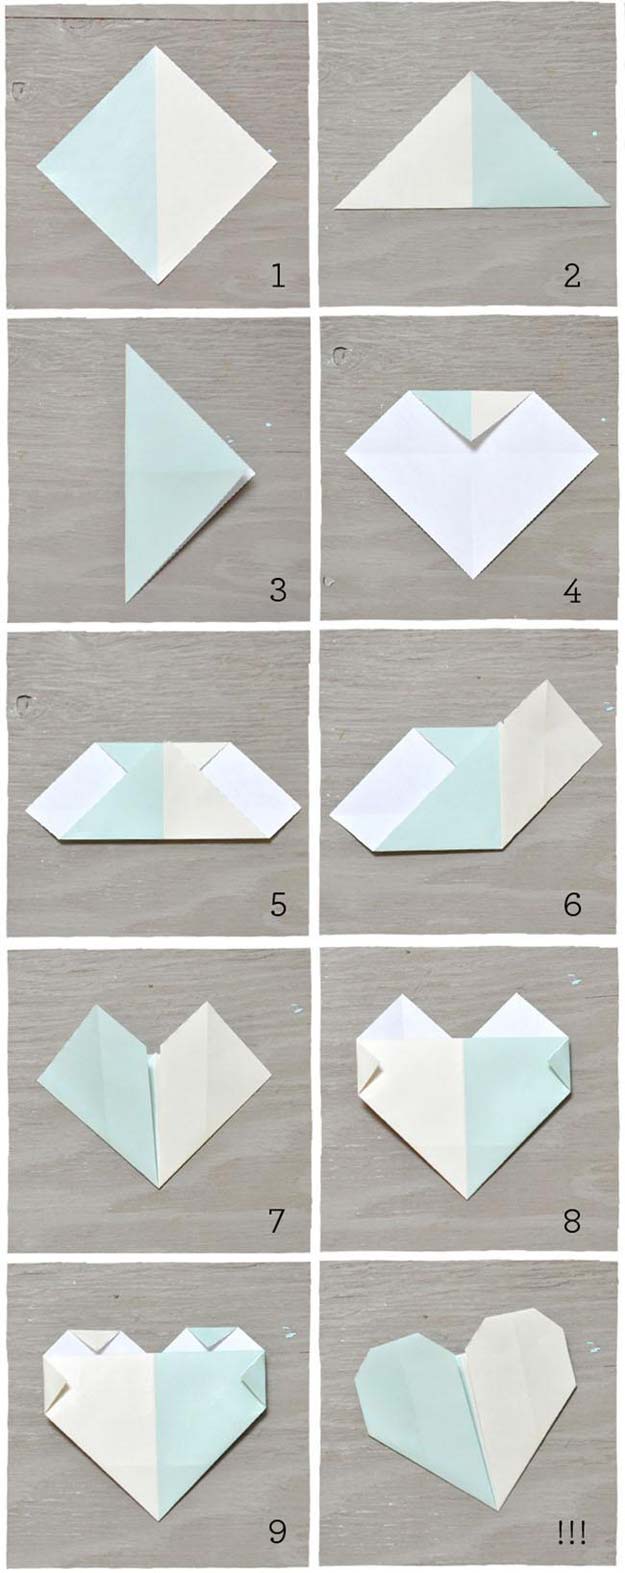 Best Origami Tutorials - Origami Heart Escort Cards - Easy DIY Origami Tutorial Projects for With Instructions for Flowers, Dog, Gift Box, Star, Owl, Buttlerfly, Heart and Bookmark, Animals - Fun Paper Crafts for Teens, Kids and Adults #origami #crafts